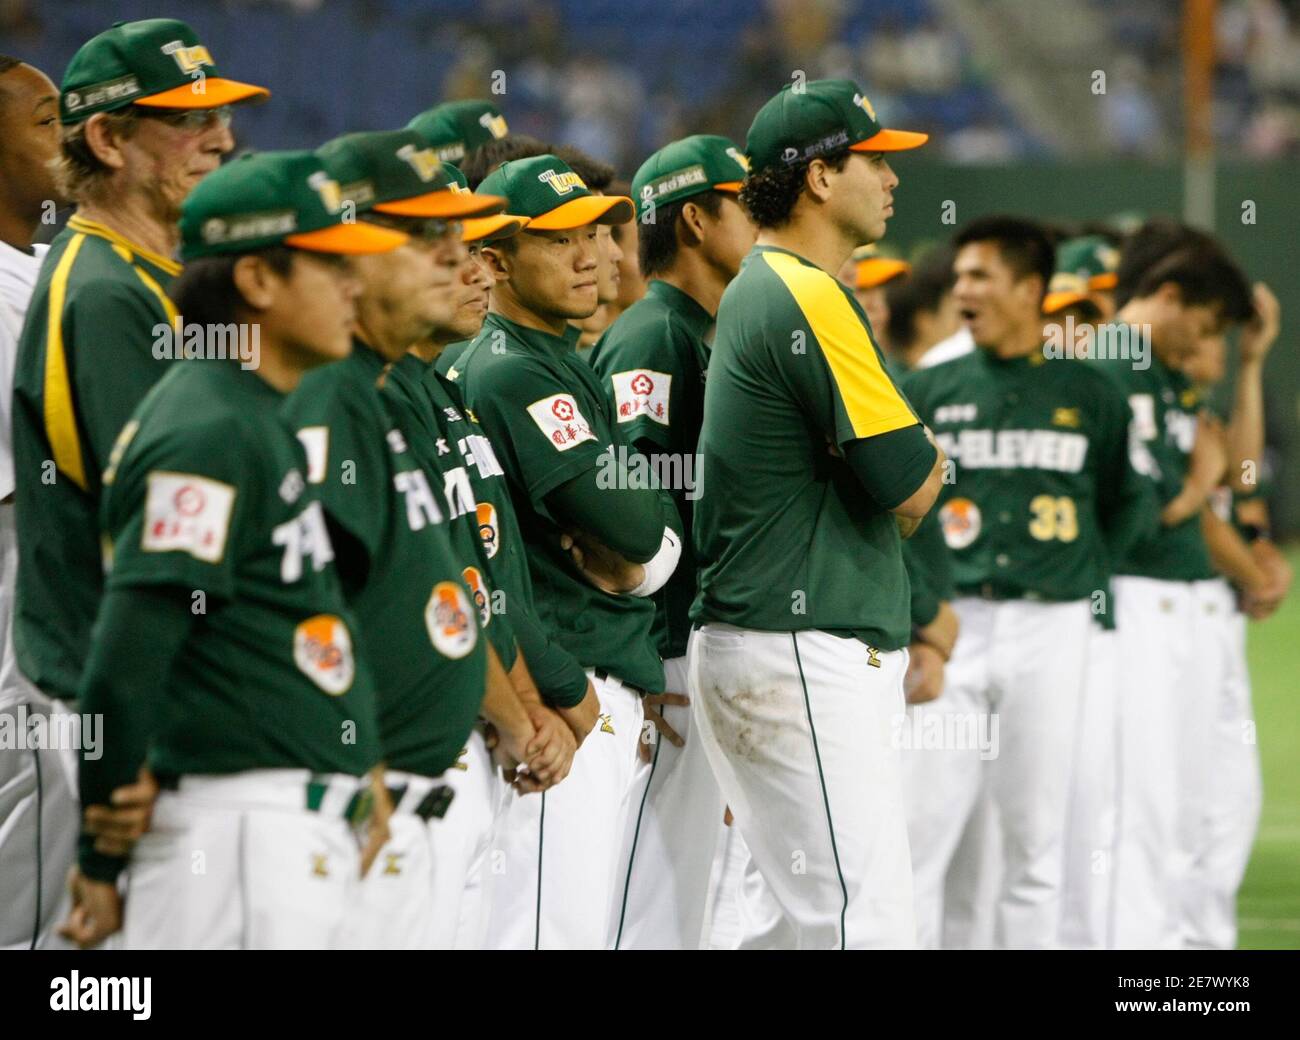 Taiwan's Uni-President 7-Eleven Lions team members attend an awards  ceremony after losing against Japan's Seibu Lions at the Asia Series 2008  baseball final game at the Tokyo dome in Tokyo November 16,